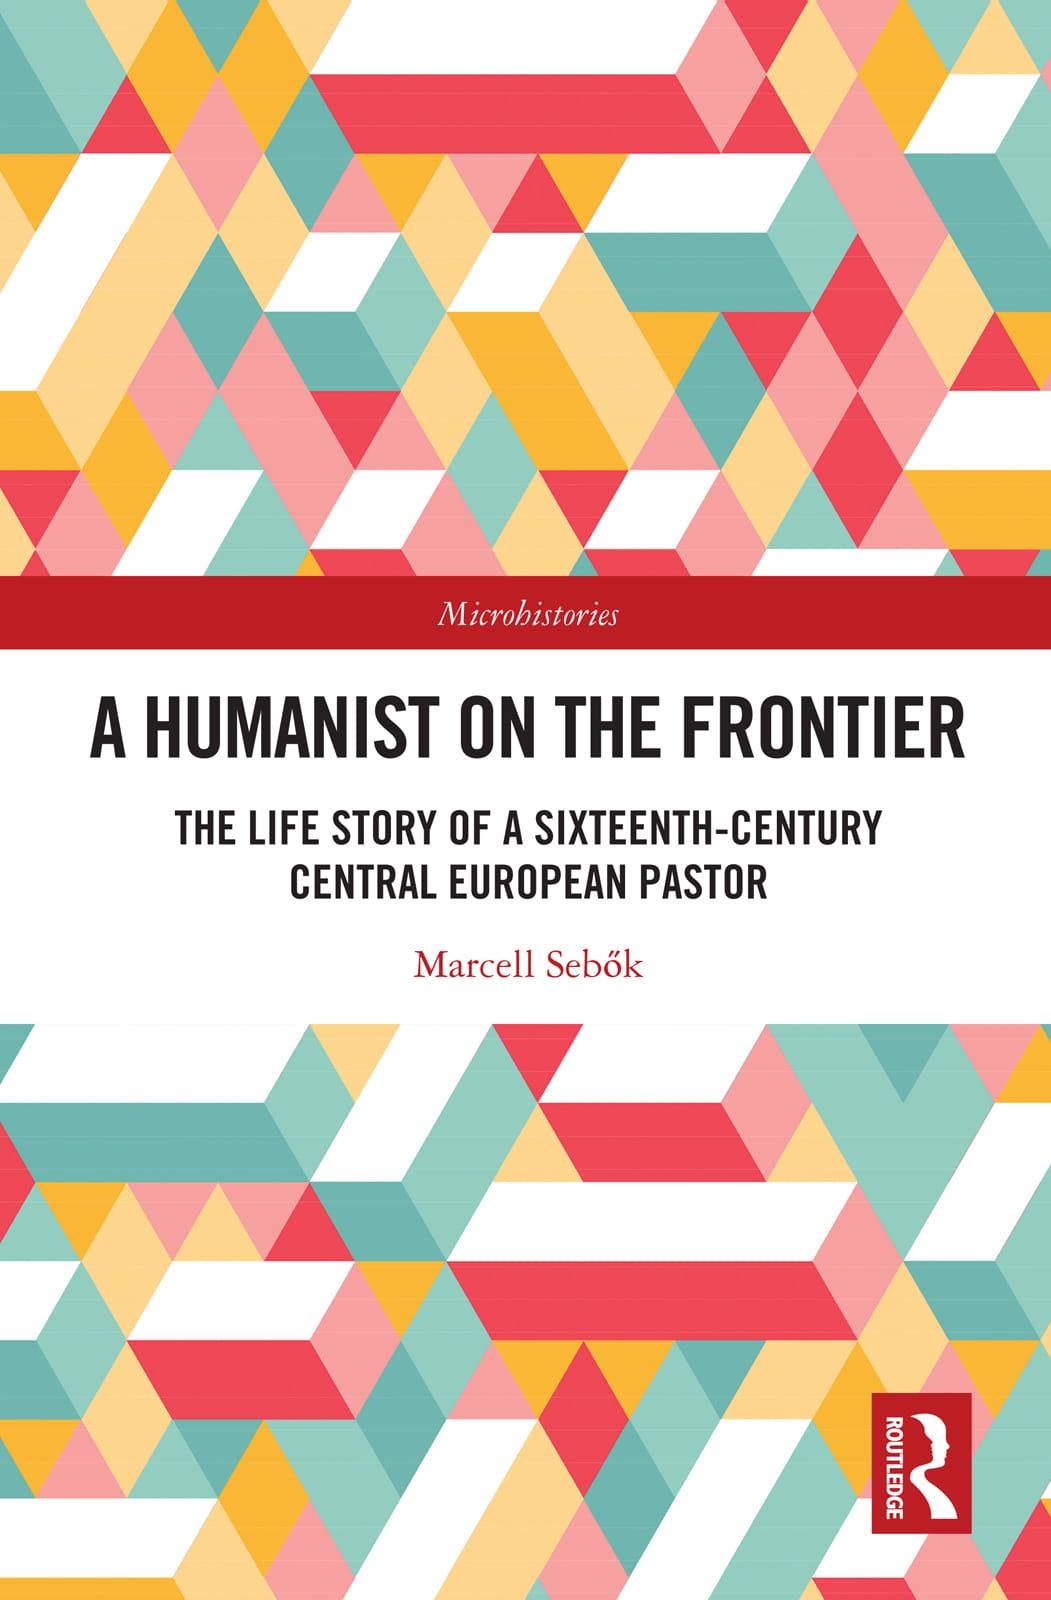 A Humanist on the Frontier: The Life Story of a Sixteenth-Century Central European Pastor